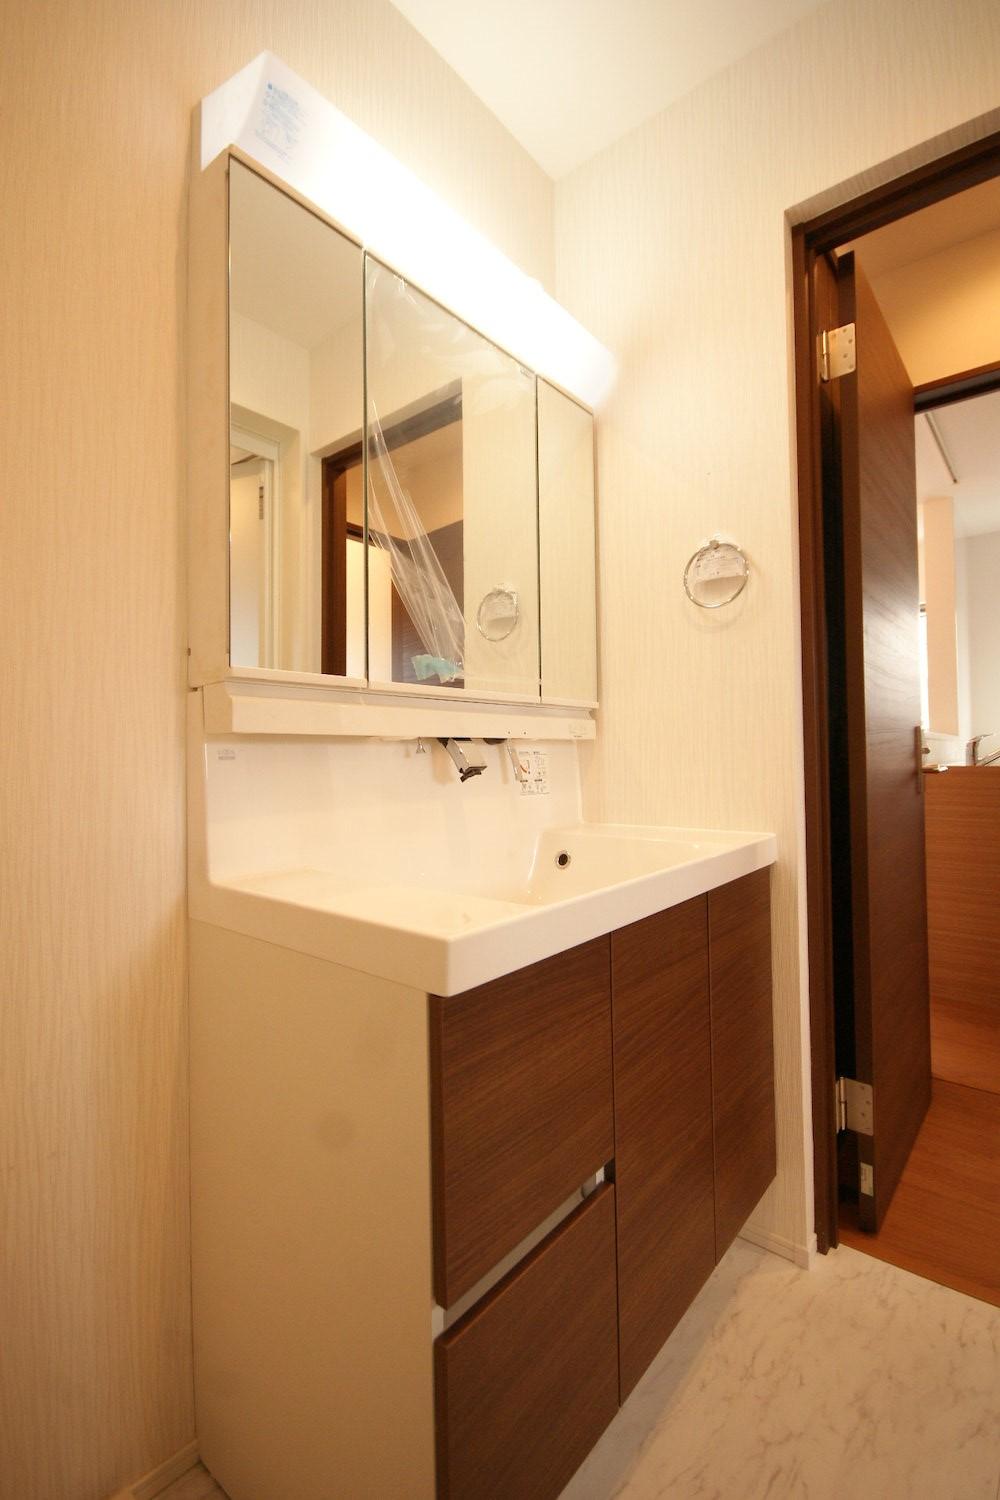 Same specifications photos (Other introspection). It can also be fashionable directing grooming, There is also a storage capacity, It is the washstand that combines practicality. (Example of construction)